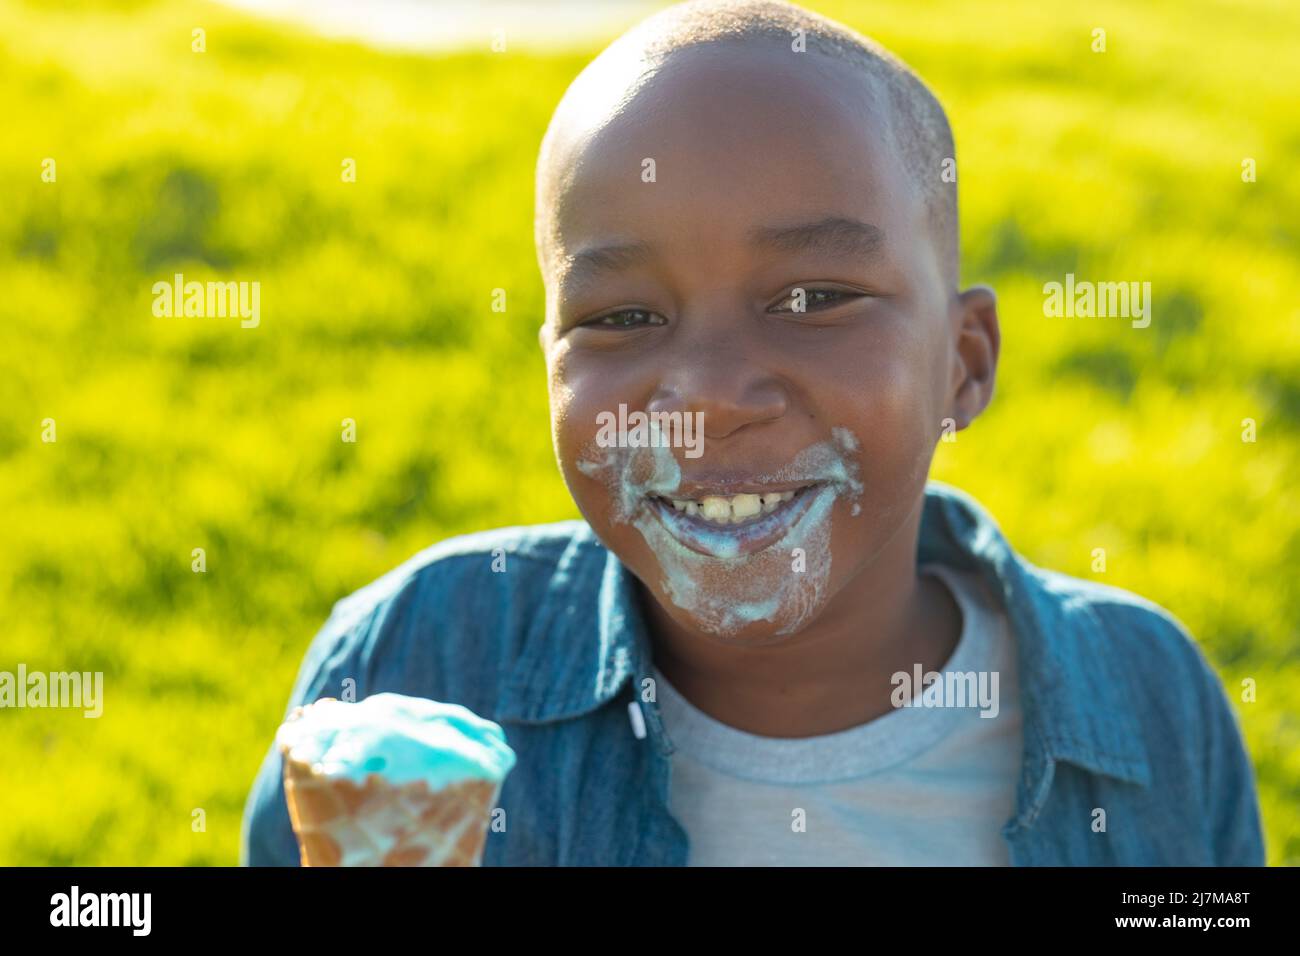 Portrait of happy african american boy with messy face from eating melting ice cream during summer Stock Photo